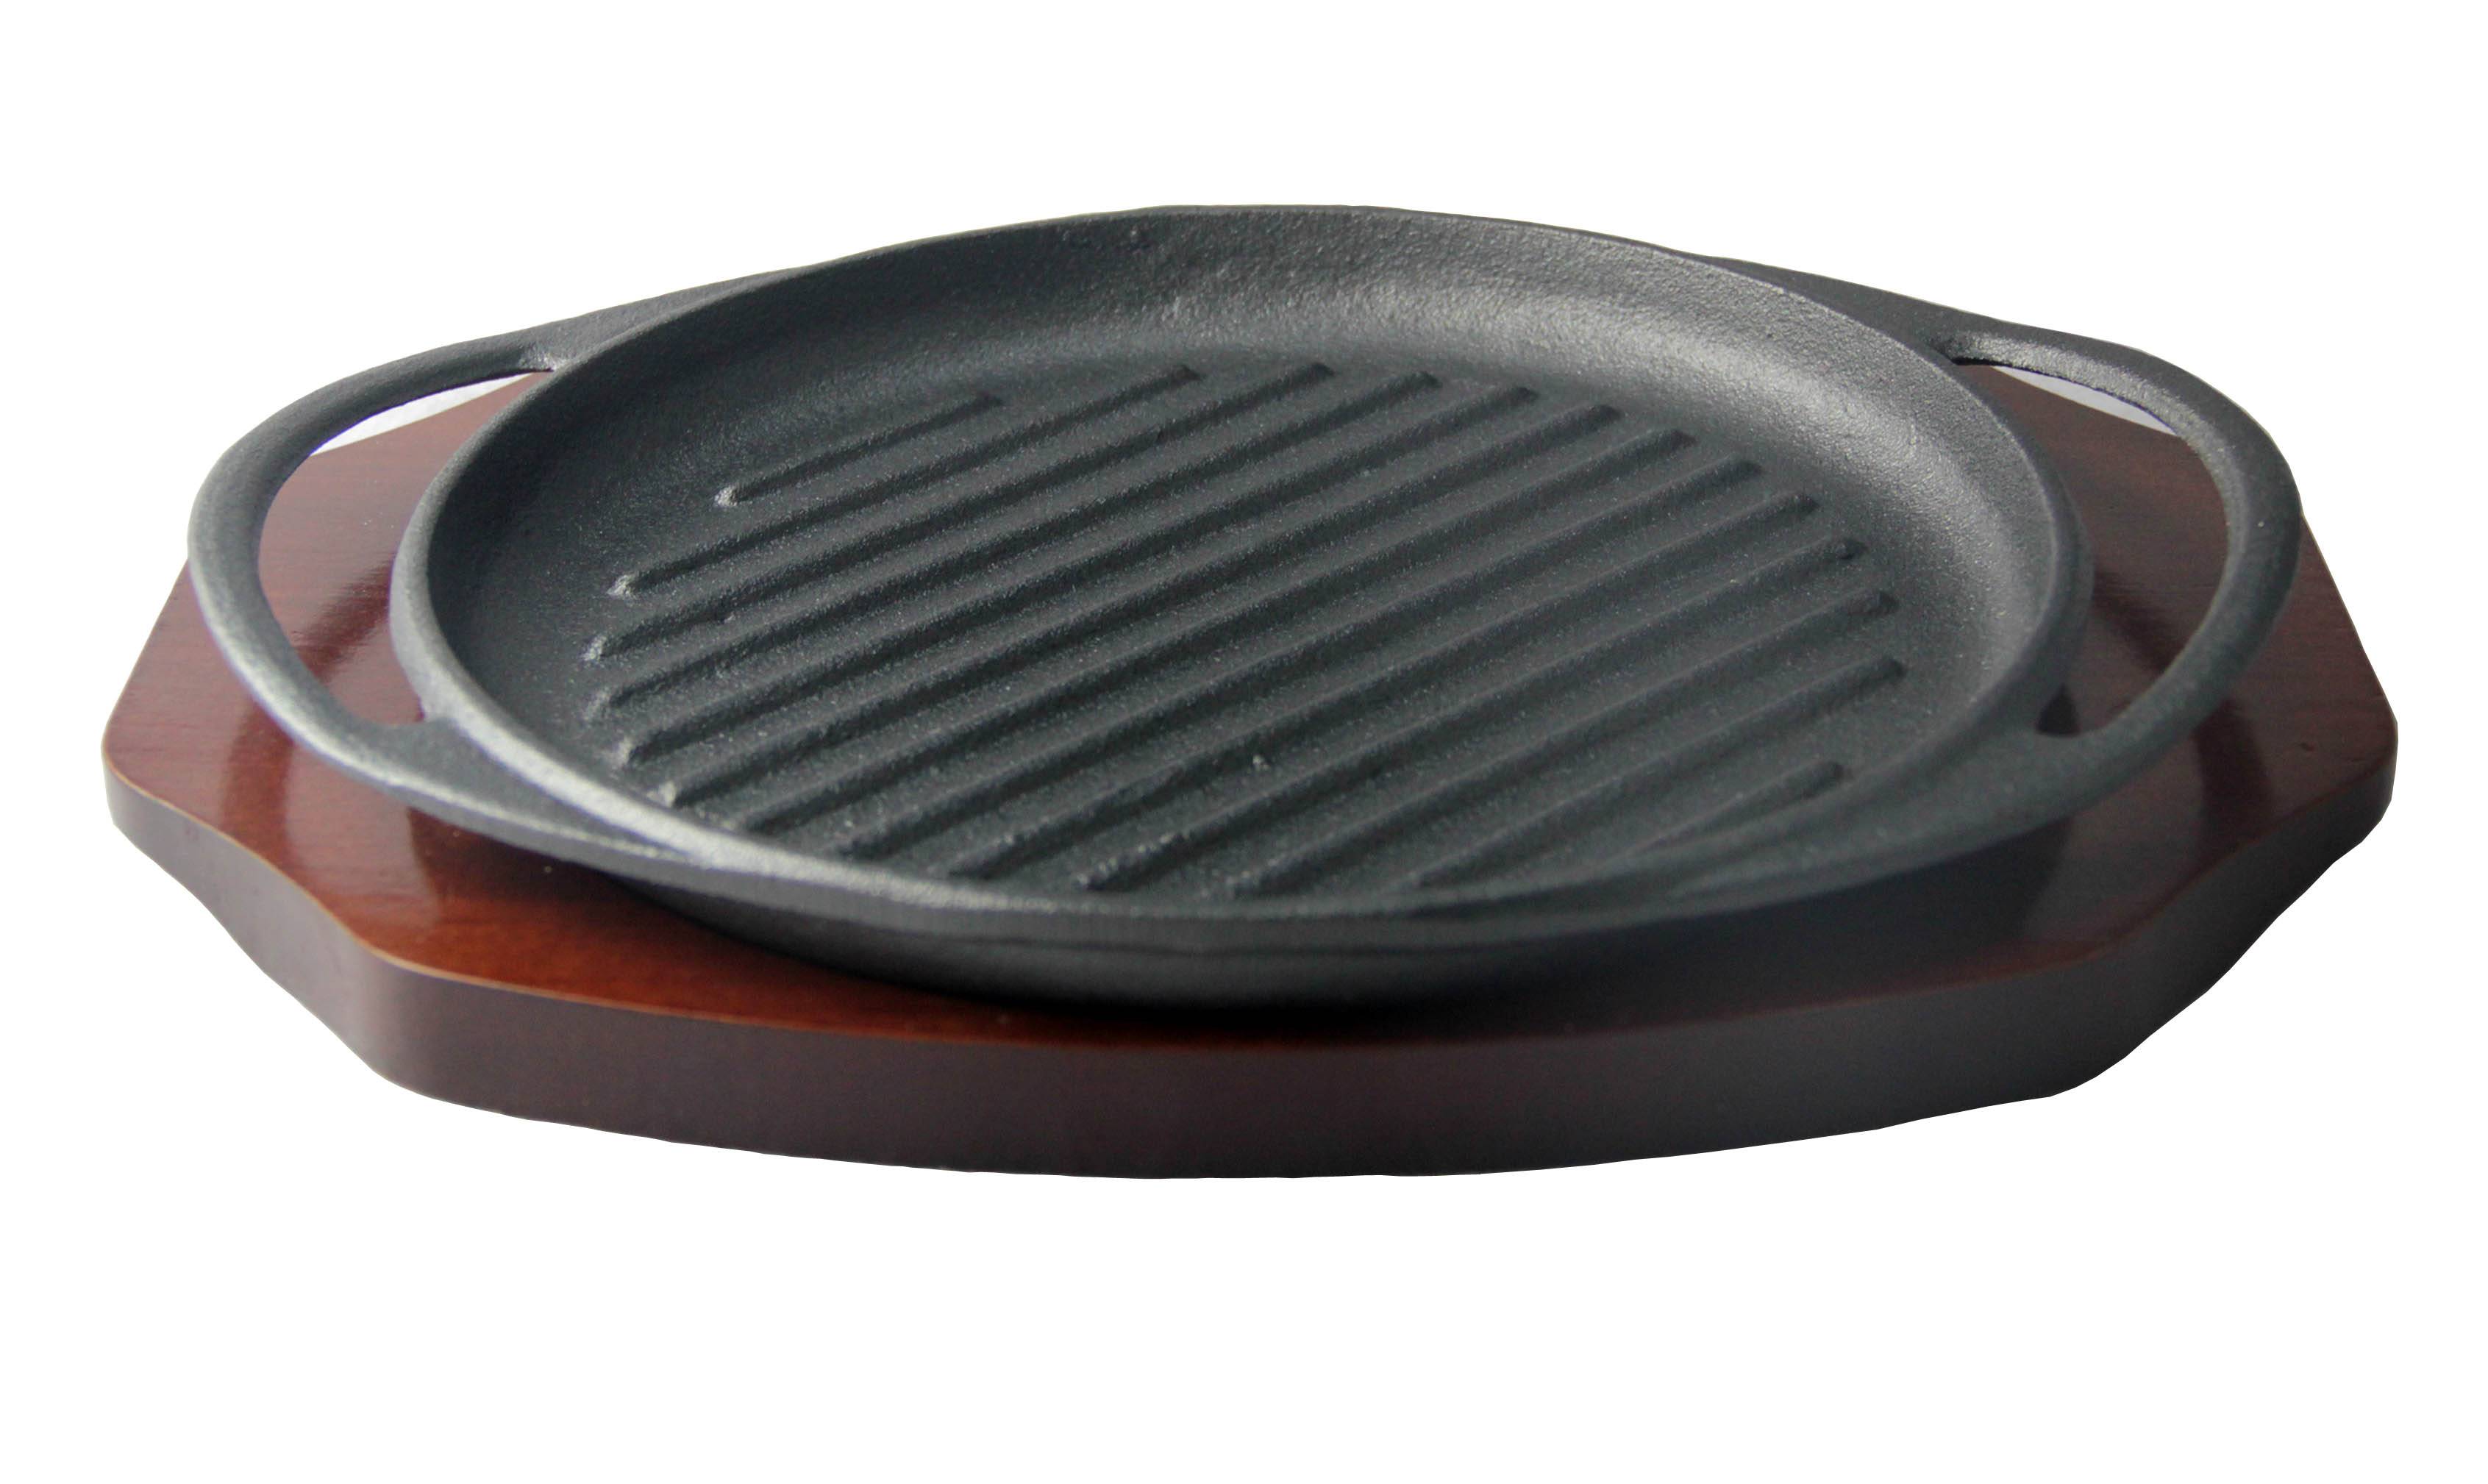 USA hot sell Round Diameter 25.5cm 2.2kg Preseasoned or Enamel cast iron BBQ Grill cookware FDA Eurofins approved